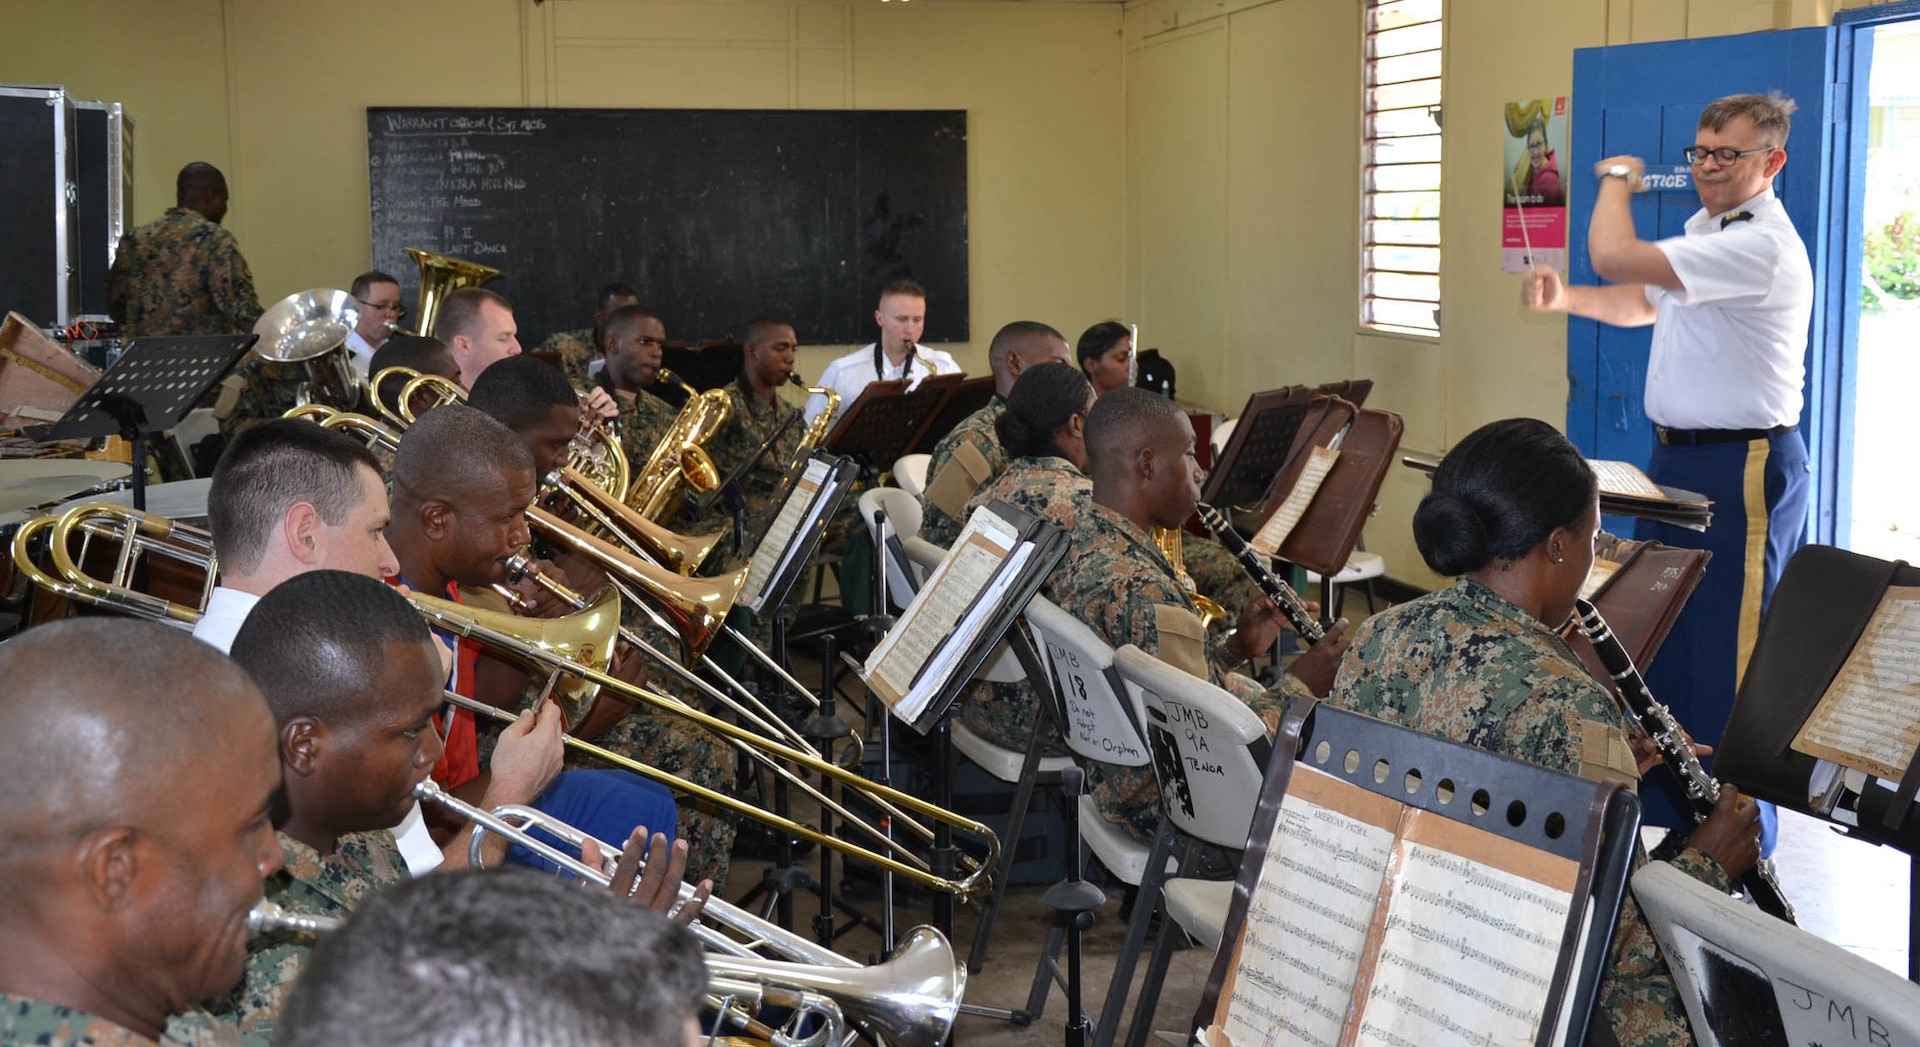 Members of the 257th Army Band and the Jamaica Military Band prepare for concert during State Partnership Program visit July 1. The National Guard State Partnership Program which provides unique partnership-building opportunities between U.S. states, territories and the District of Columbia and foreign countries.